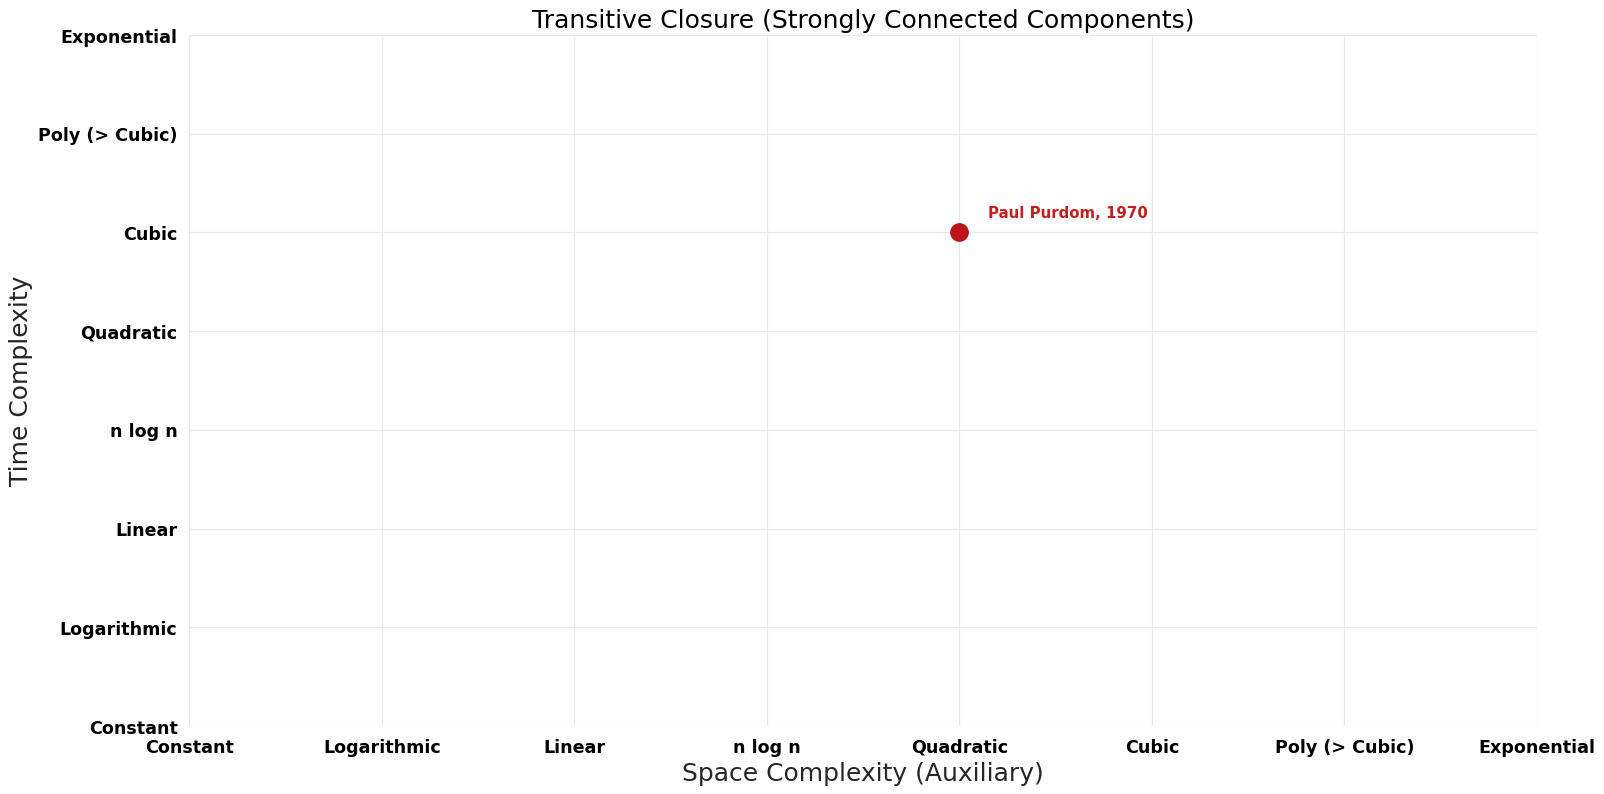 Strongly Connected Components - Transitive Closure - Pareto Frontier.png